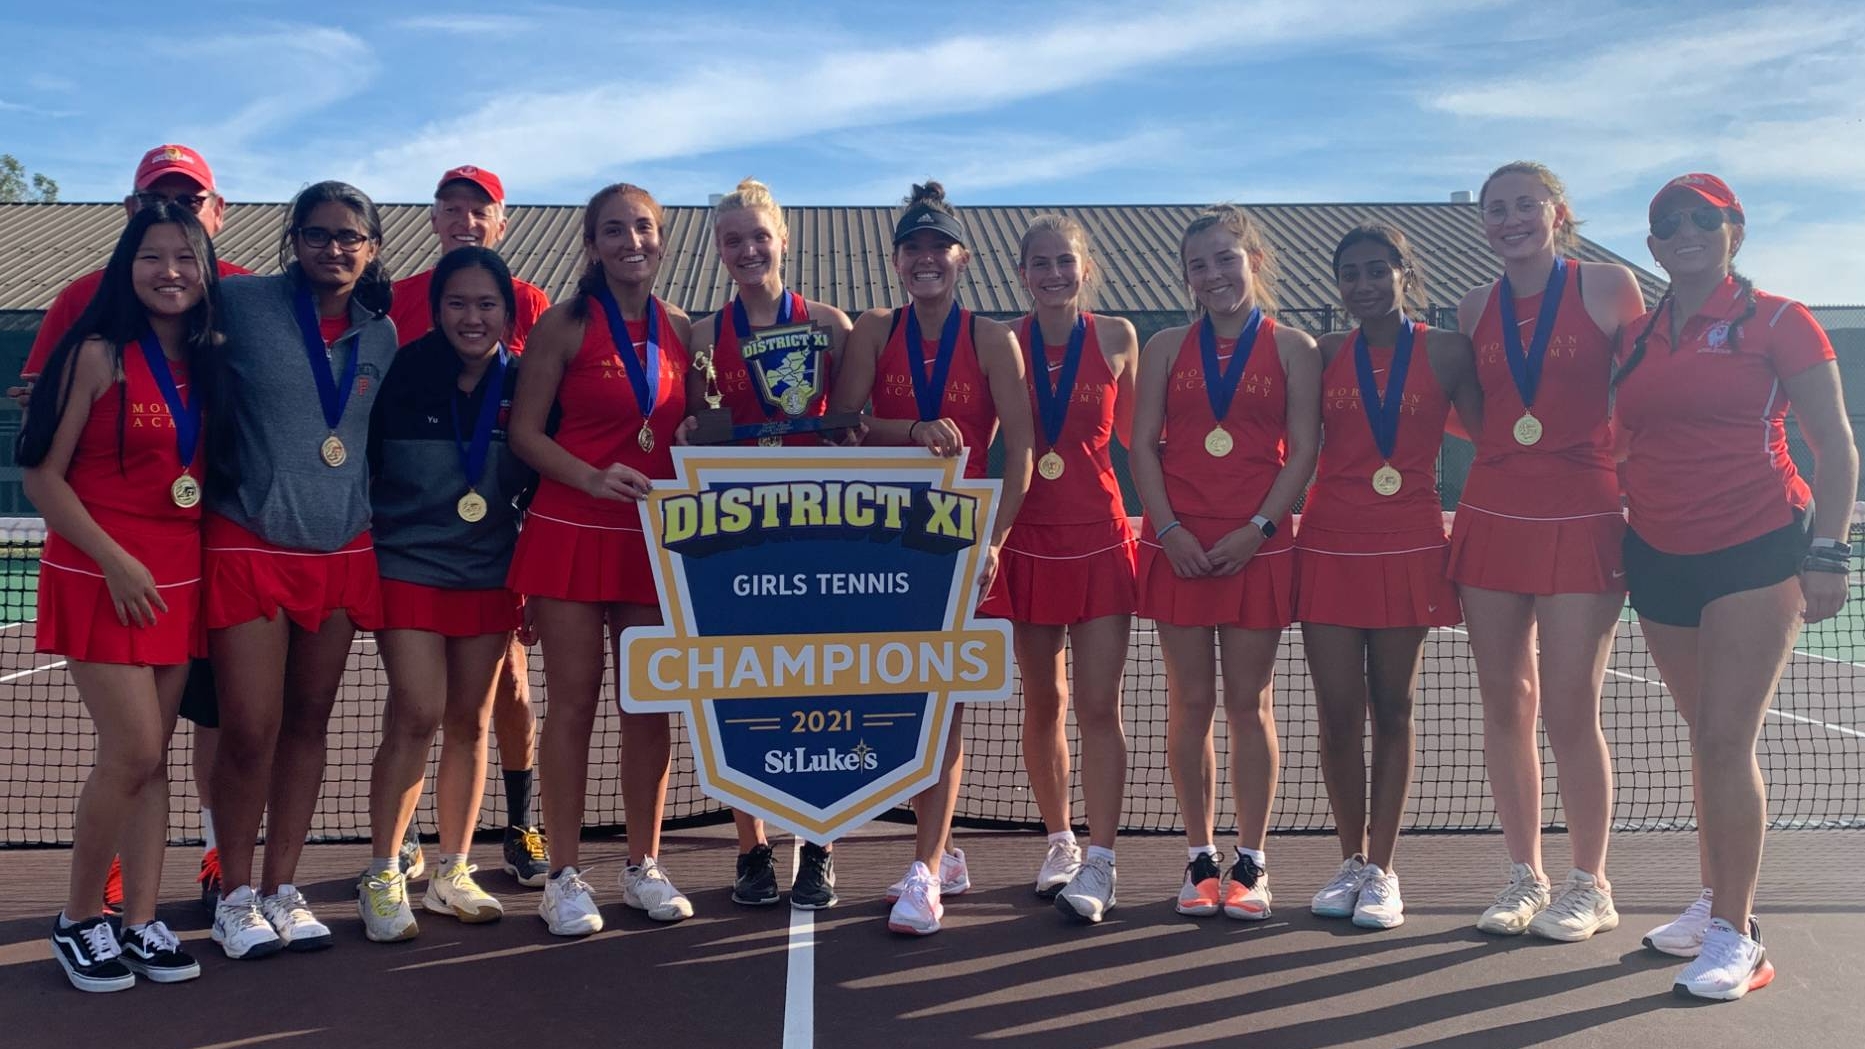 2021 GIRLS TENNIS DISTRICT XI CHAMPIONS - Content Image for moravianacademypa_bigteams_43071